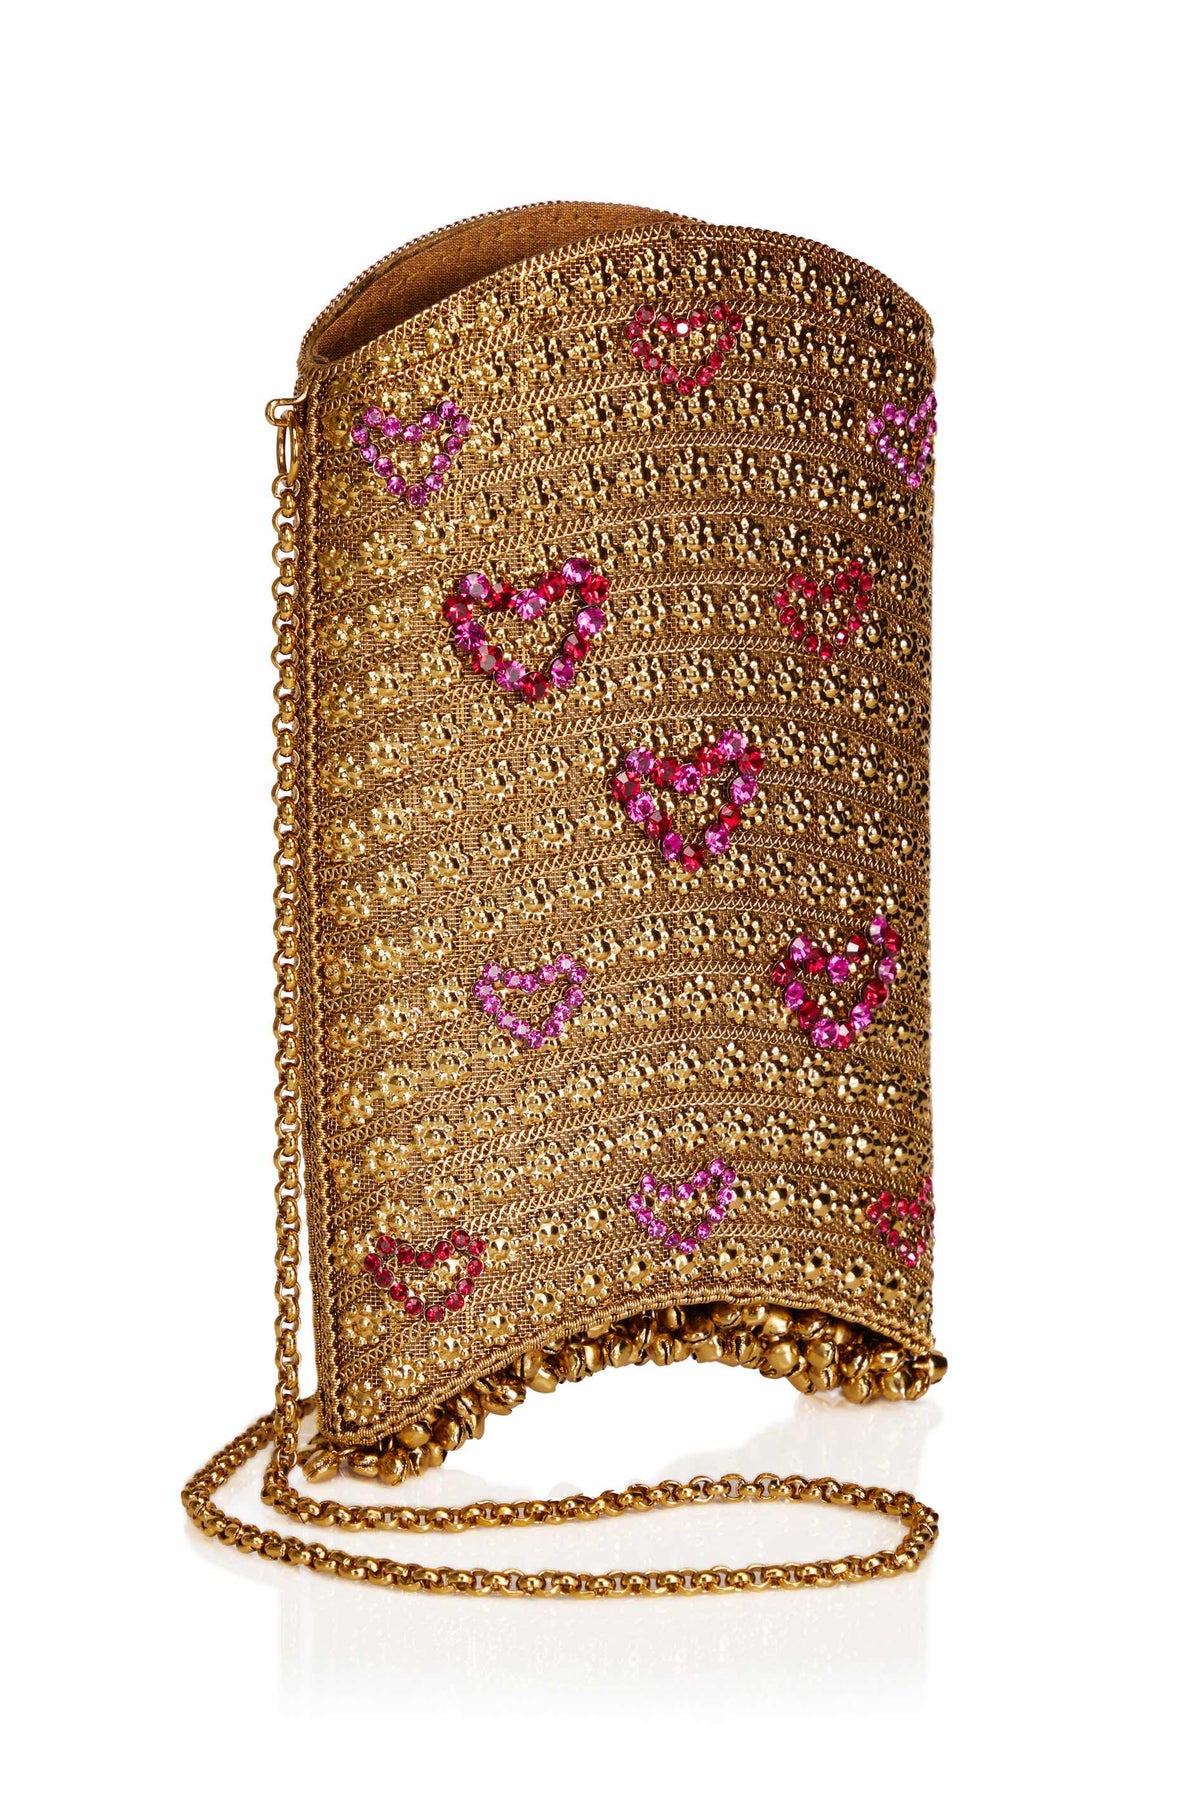 Mae Cassidy | Sweetheart Phone Bag | Ruby Red & Fuchsia Pink / Gold